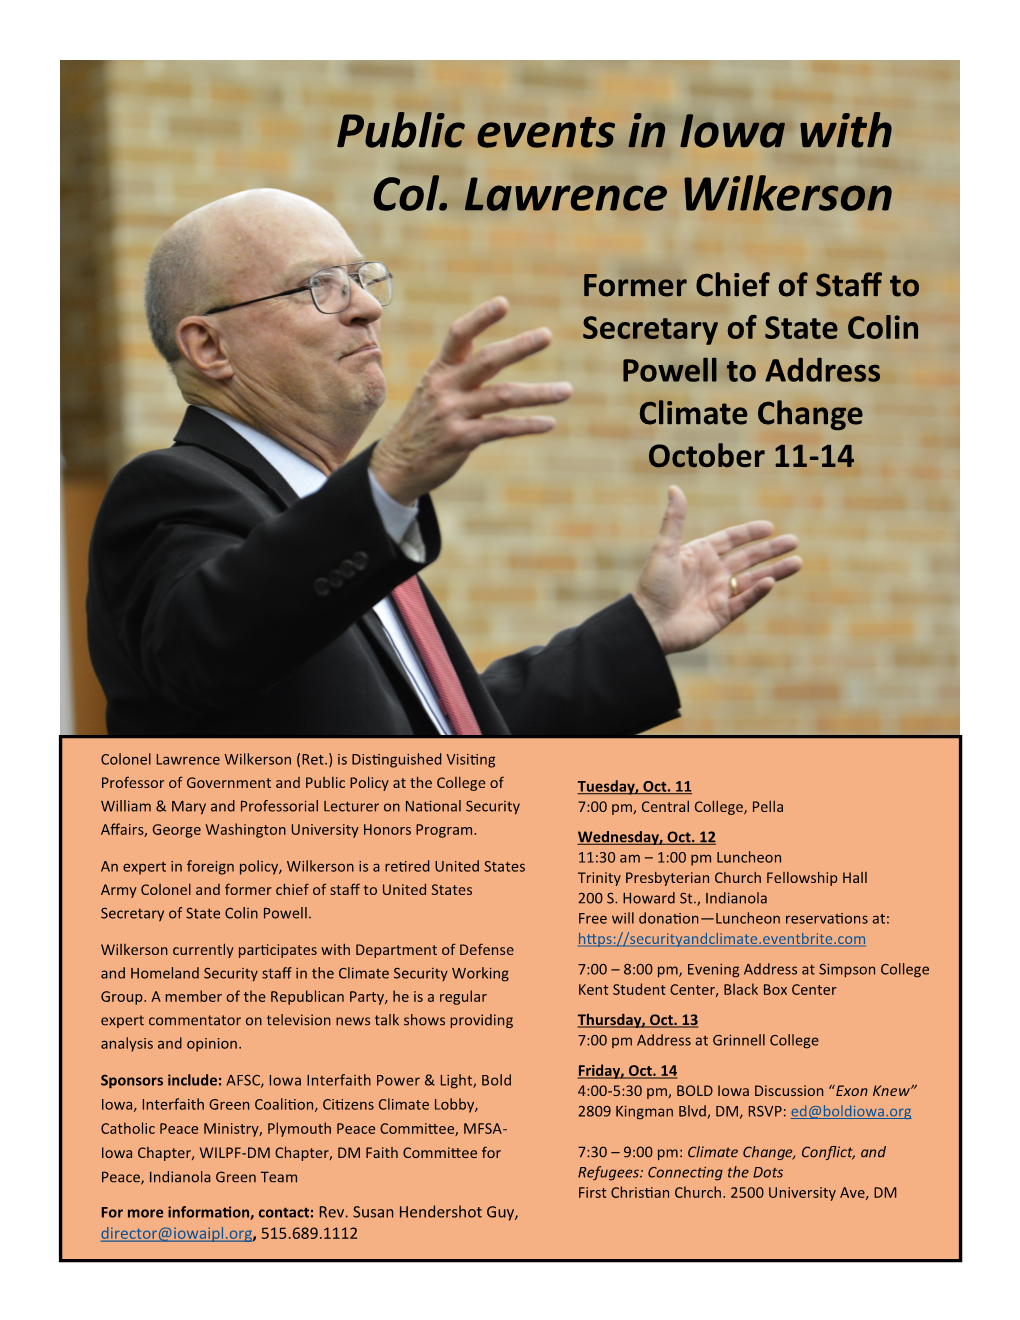 Public Events in Iowa with Col. Lawrence Wilkerson